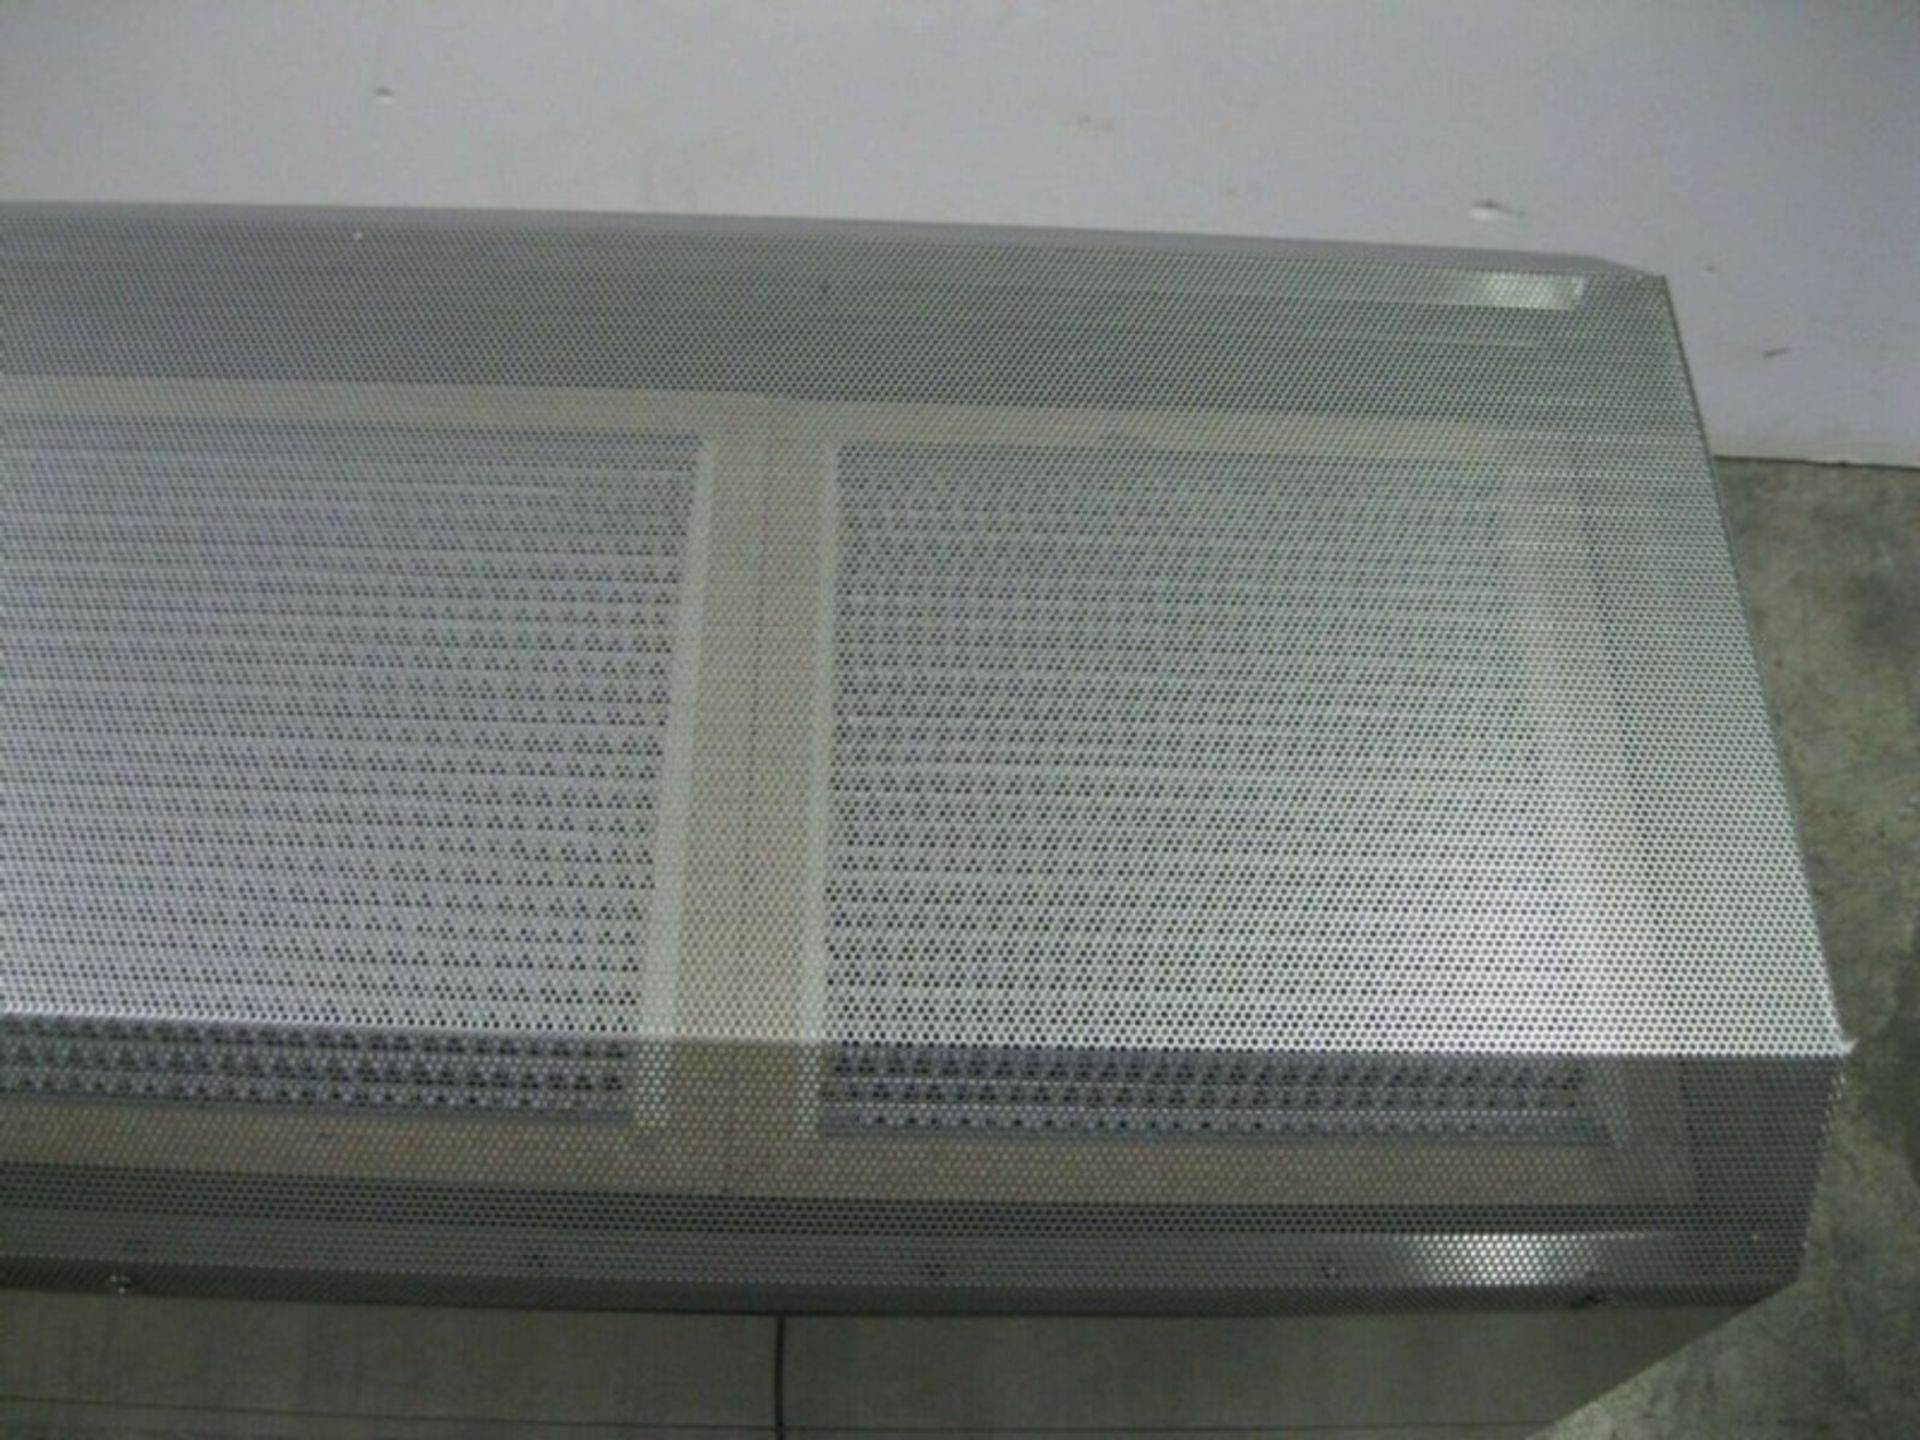 Aire Inc. 36" Powered Air Curtain Insect Control, Model BCE-1-36, 120 V, New, Still in Crate, - Image 2 of 3